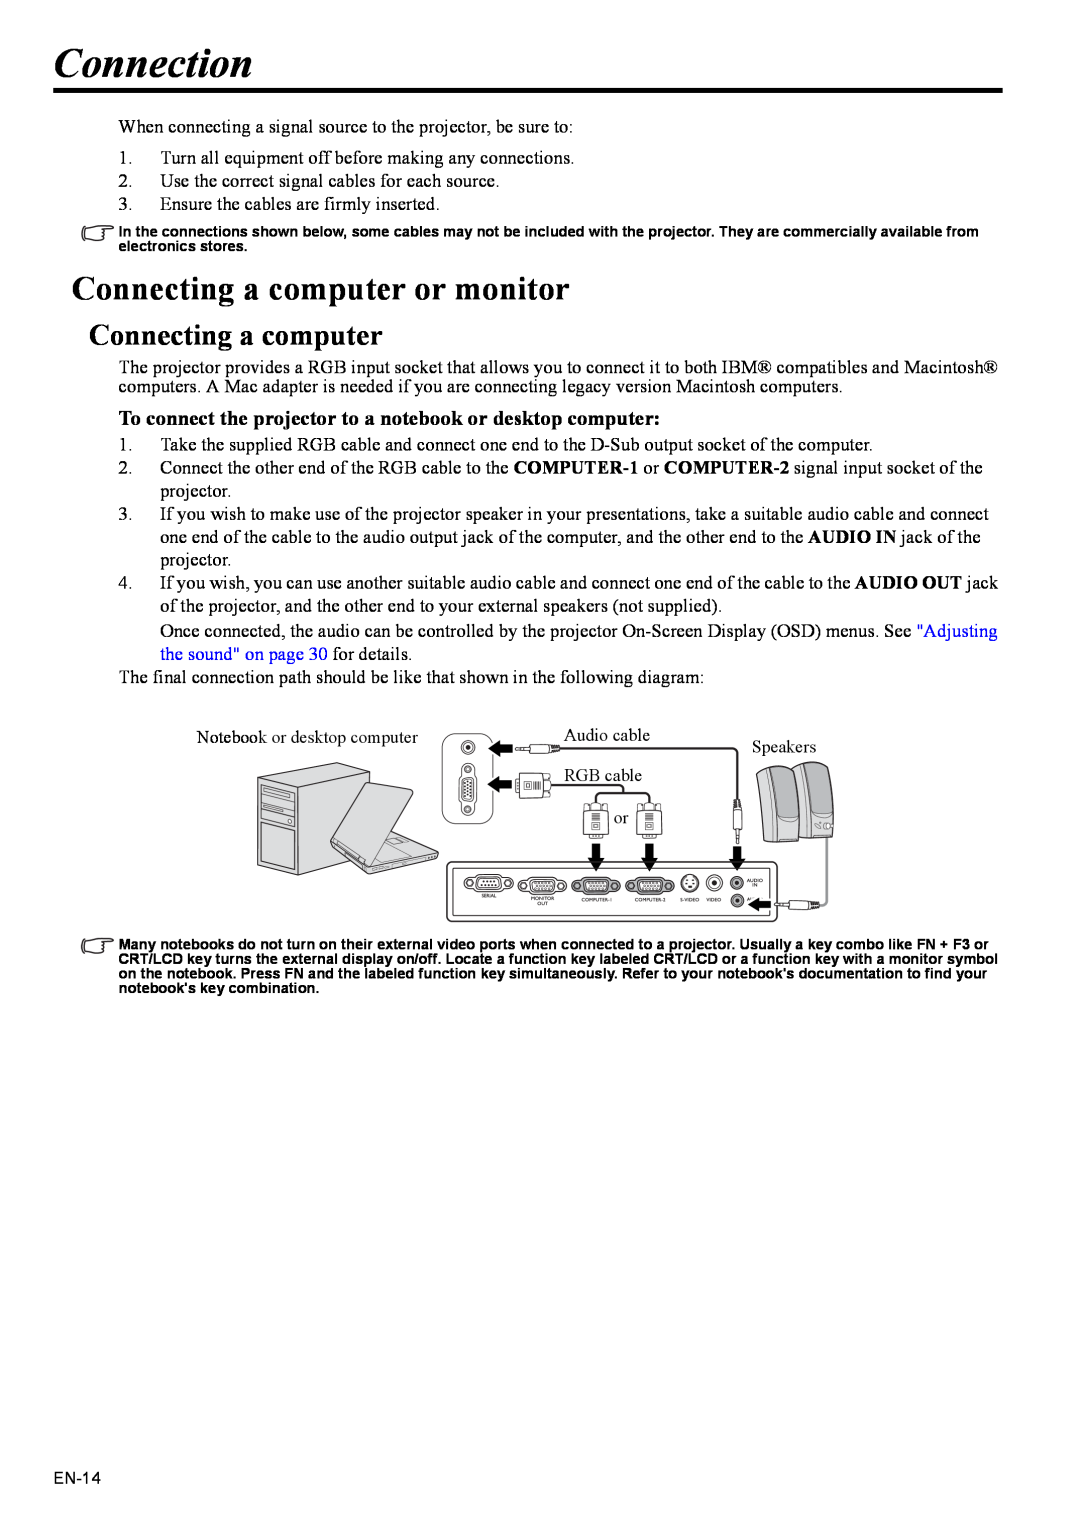 Mitsubishi Electronics EX200U user manual Connection, Connecting a computer or monitor 